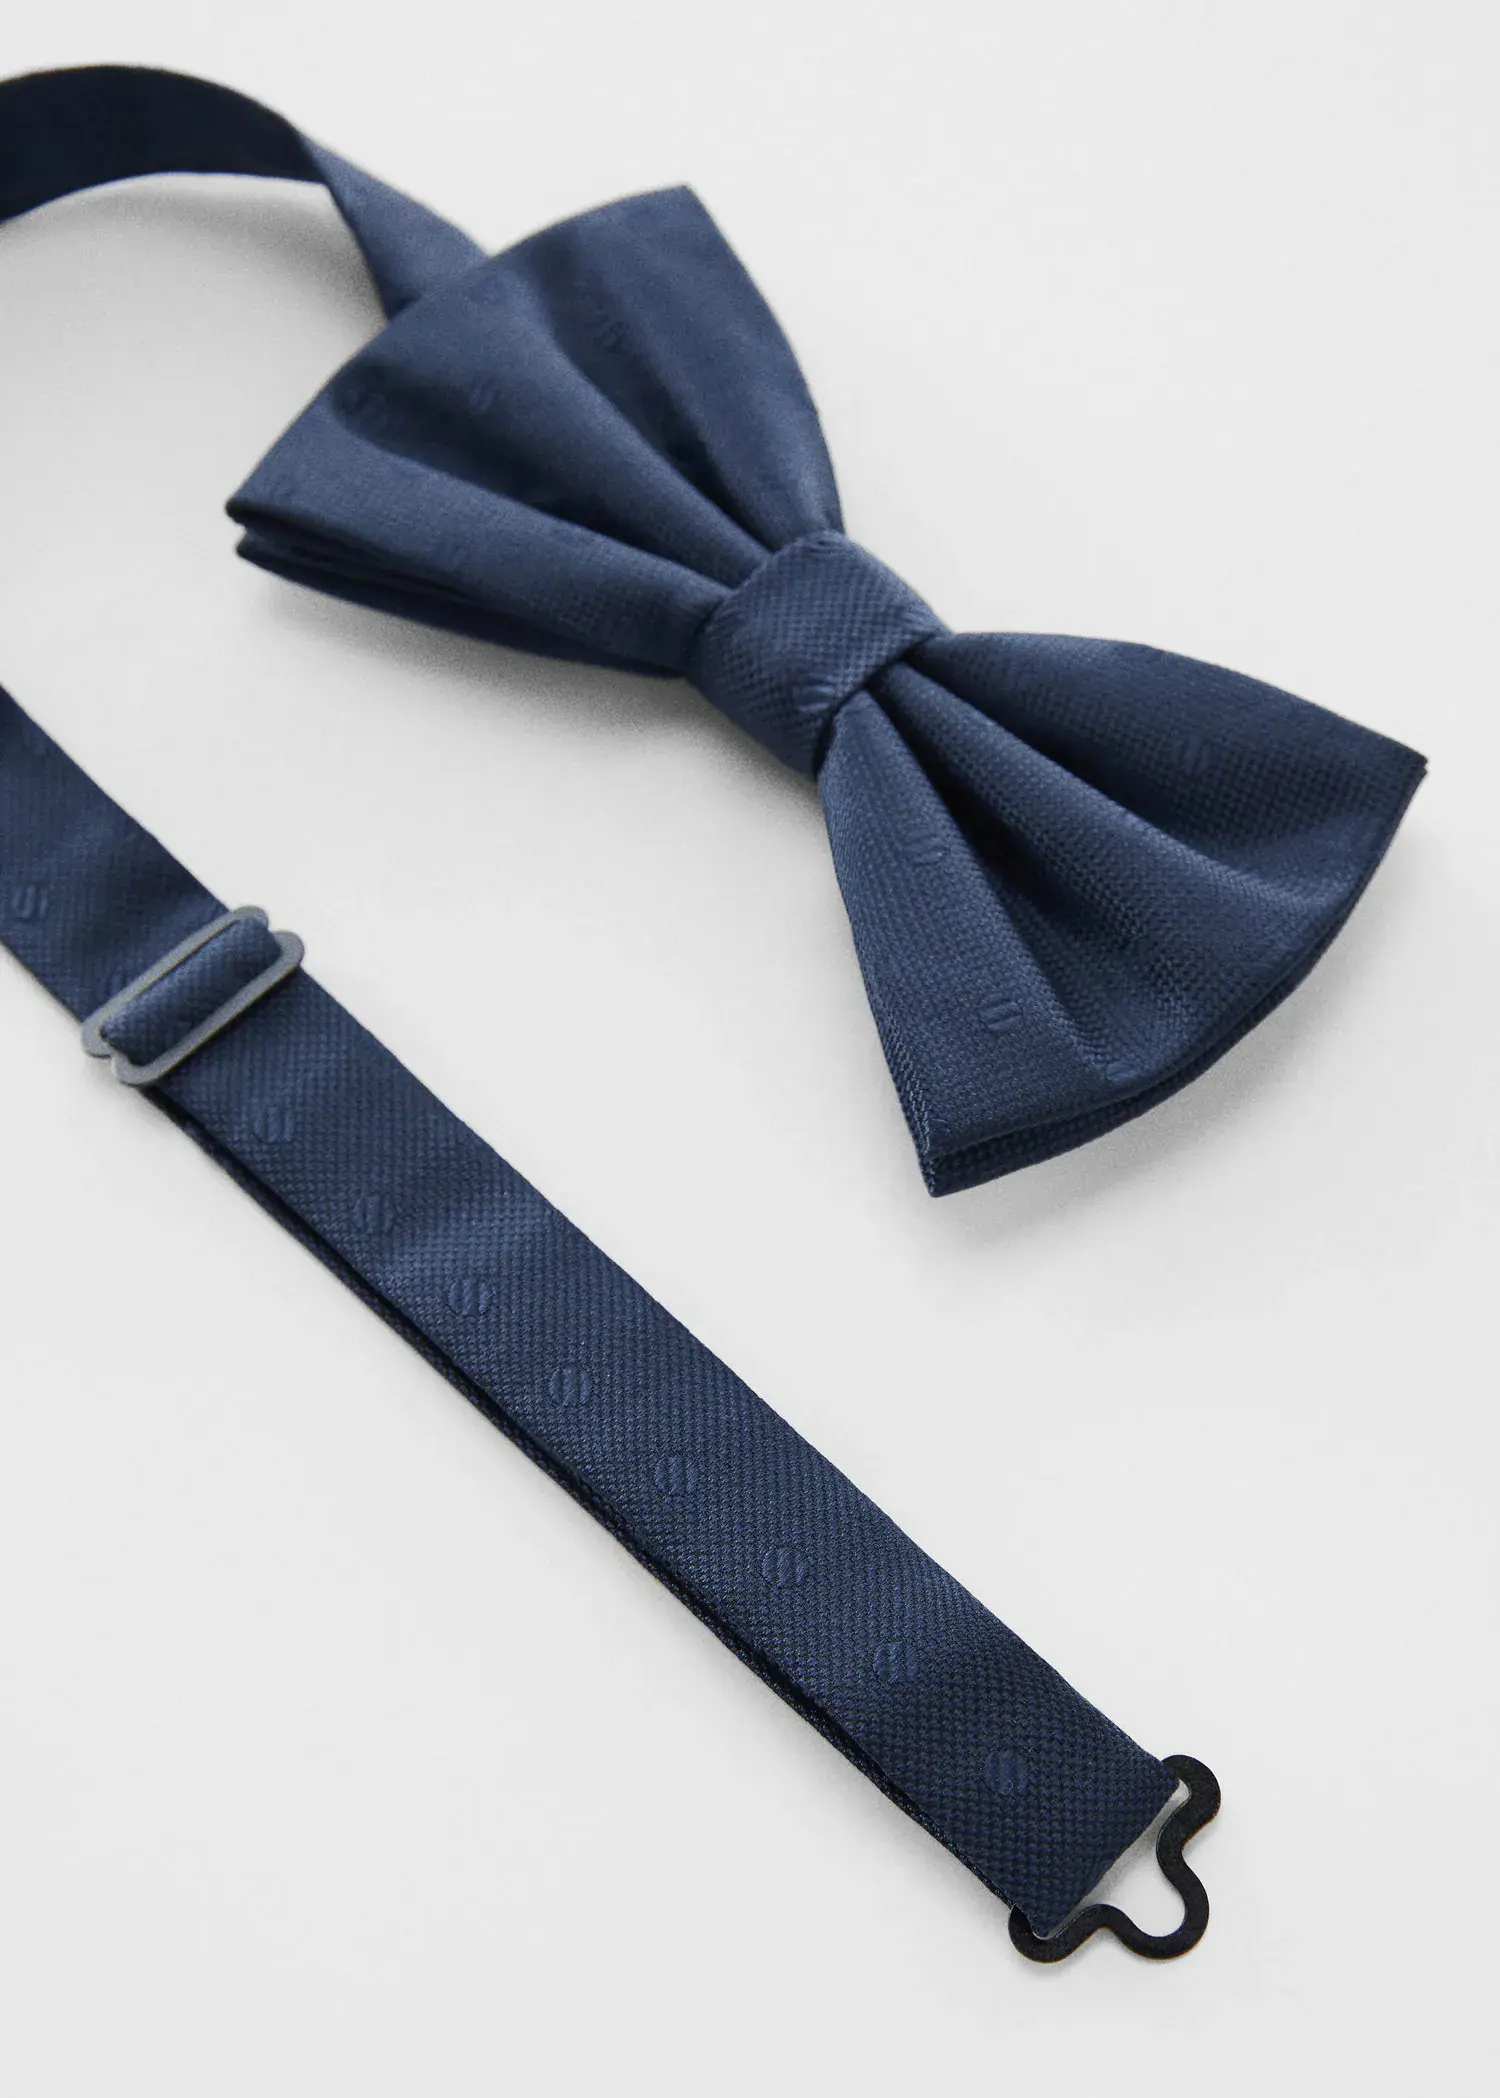 Mango Bow tie with polka-dot structure. a blue bow tie and a blue strap. 